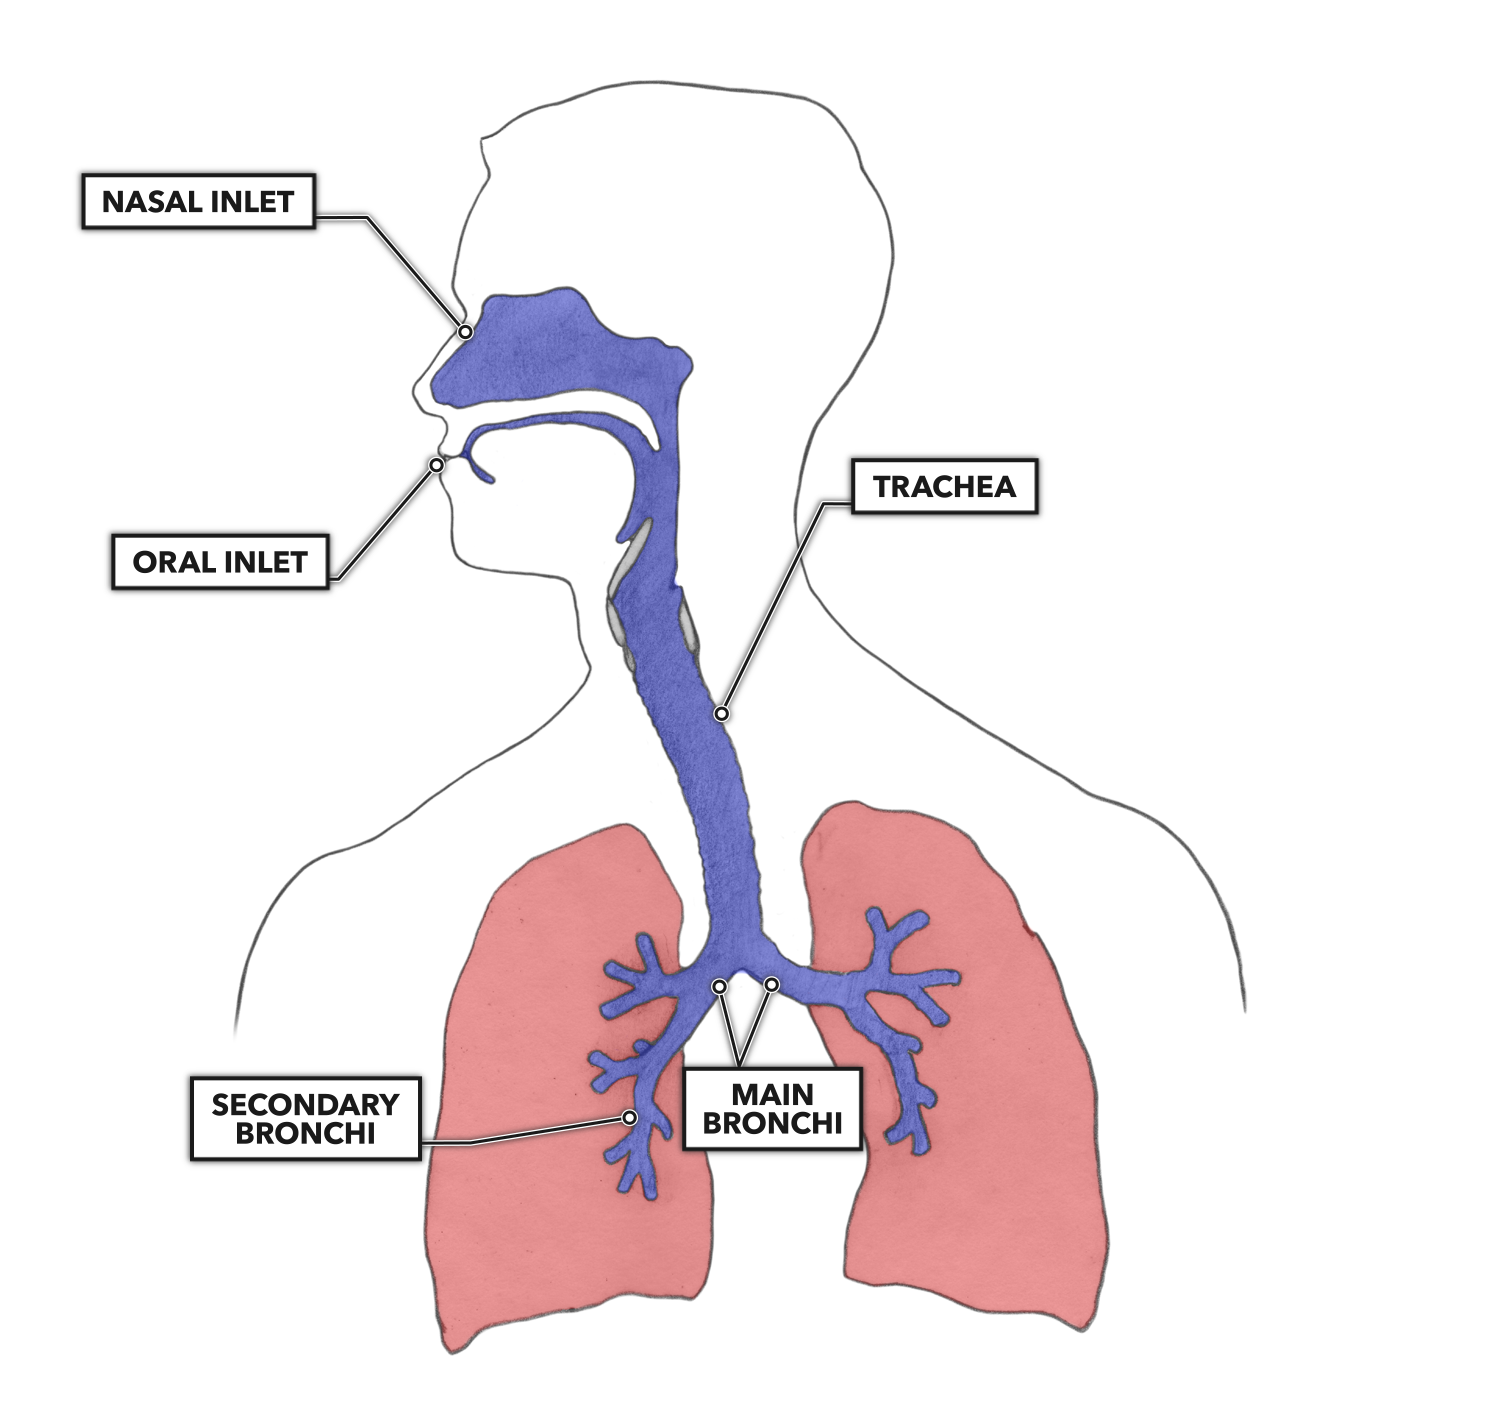 passageway for air to travel into the lungs